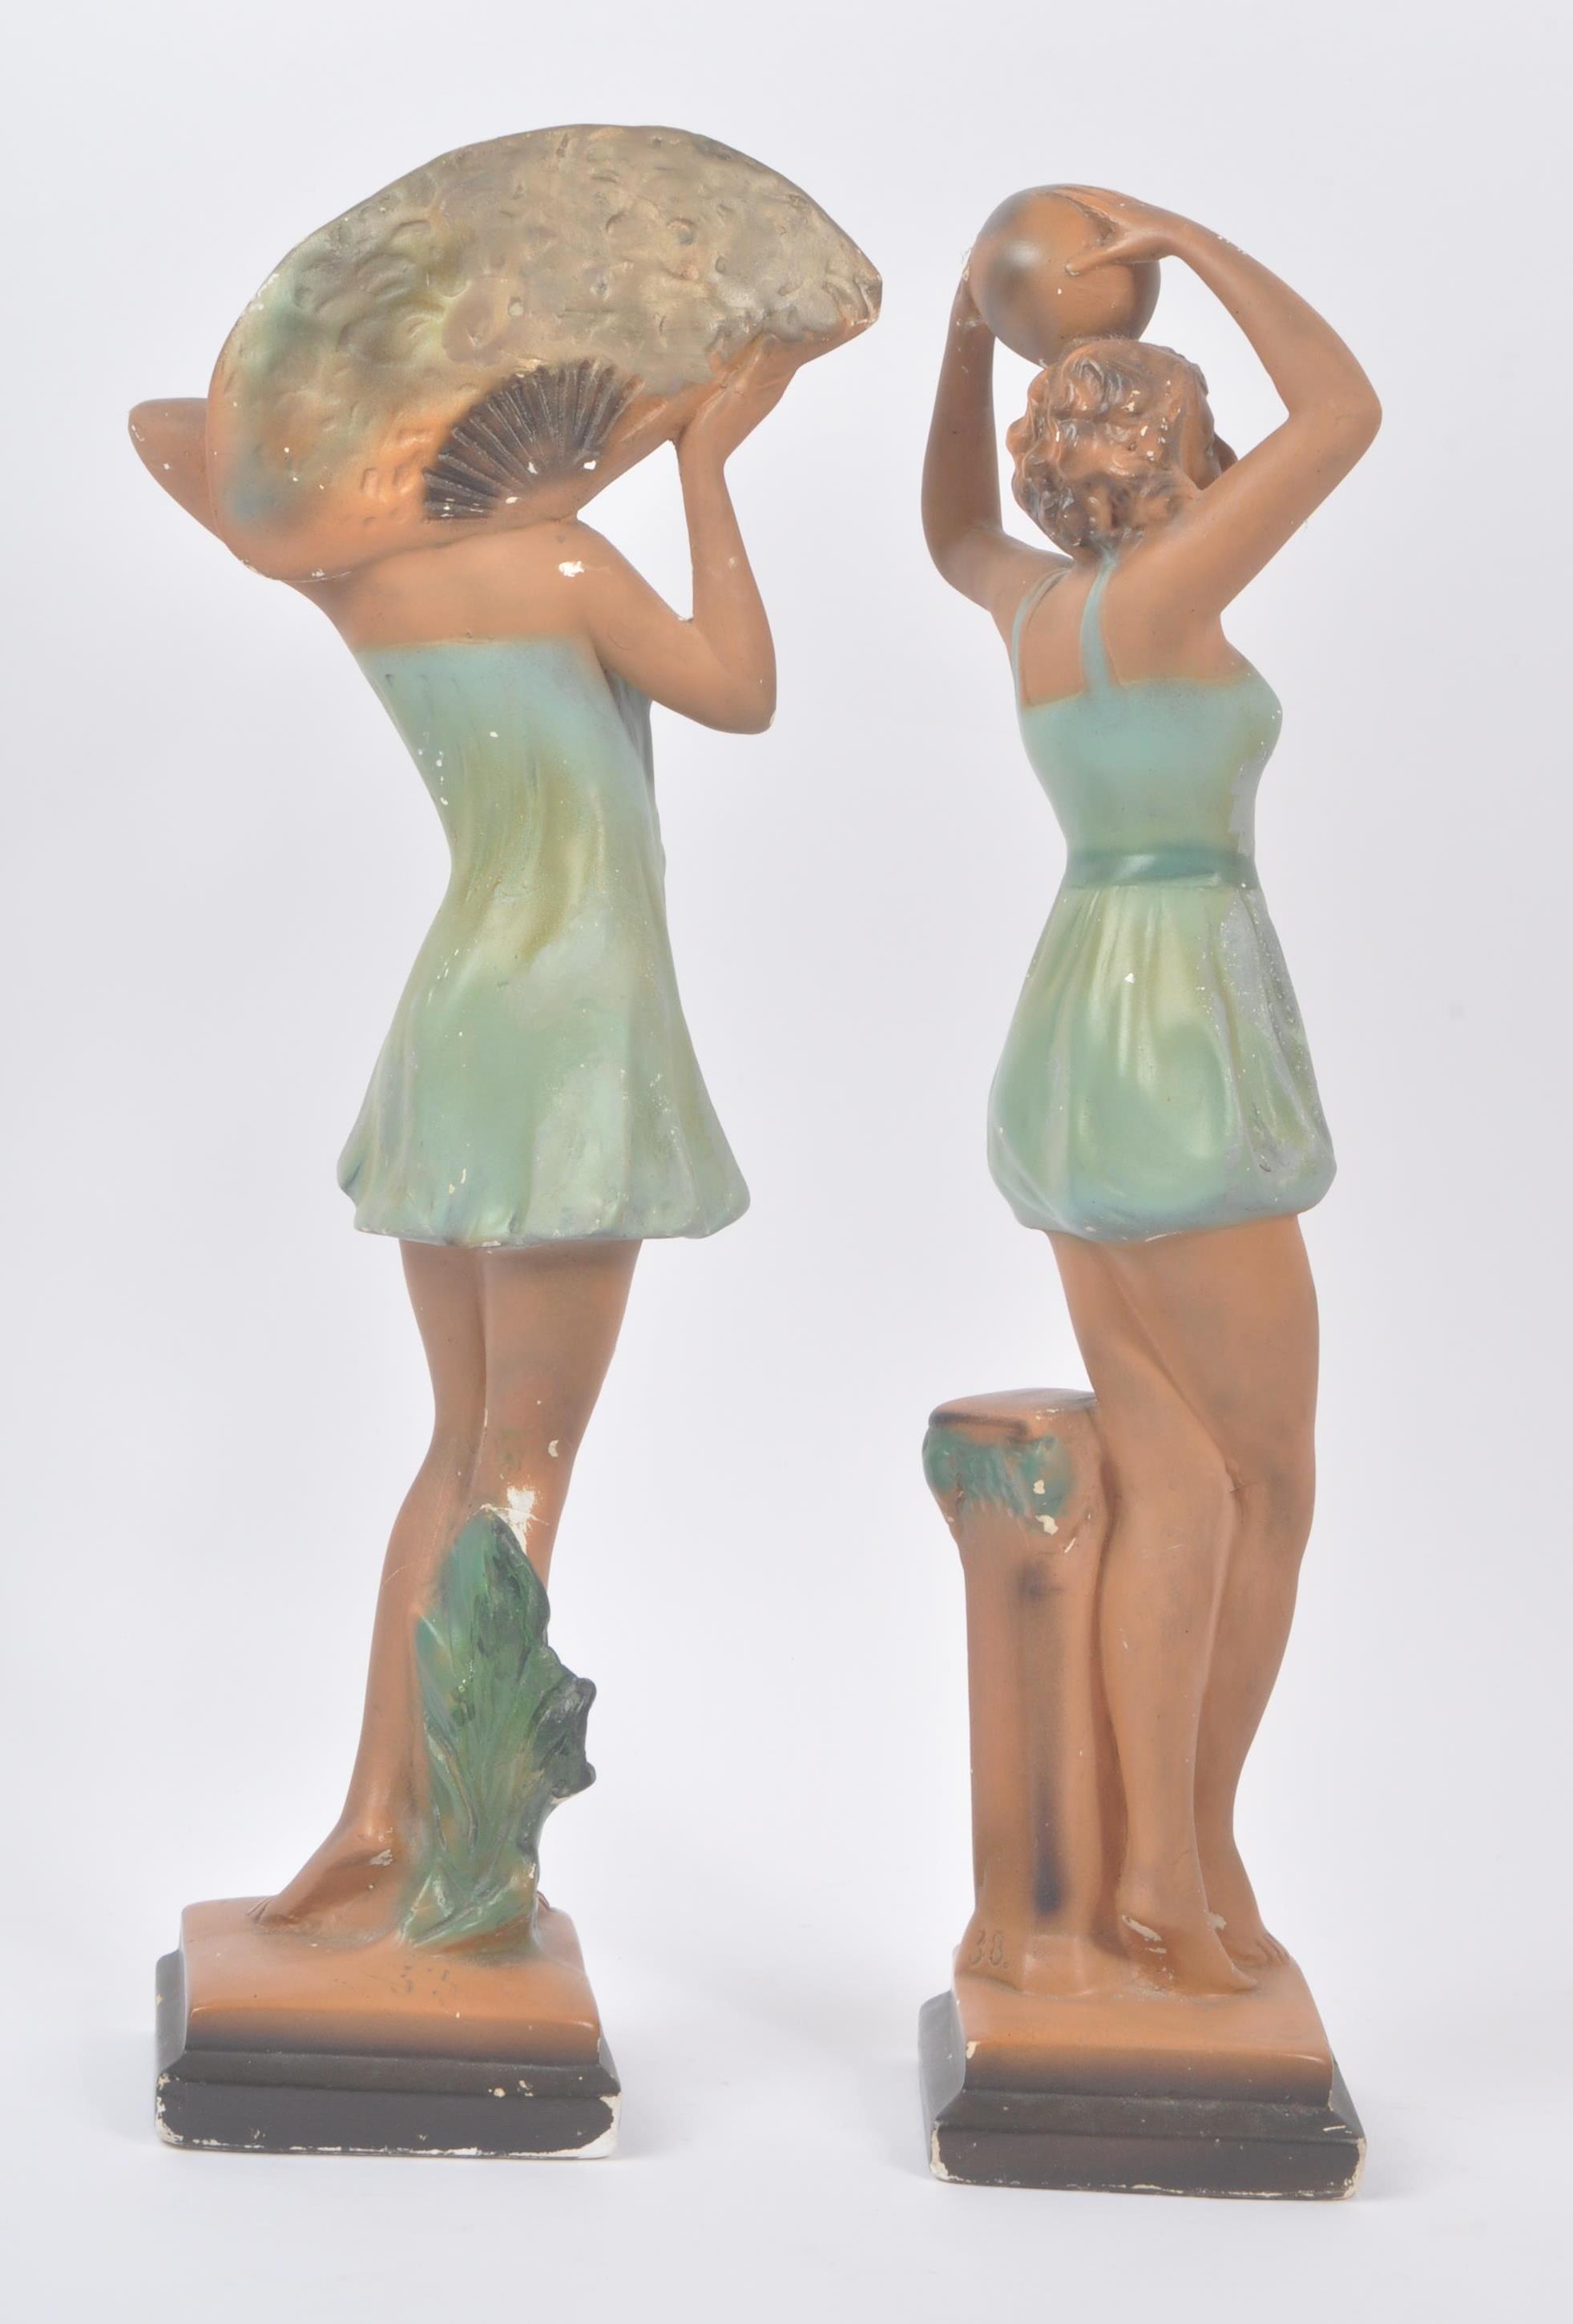 PAIR OF EARLY 20TH CENTURY ART DECO FIGURINES - Image 3 of 6